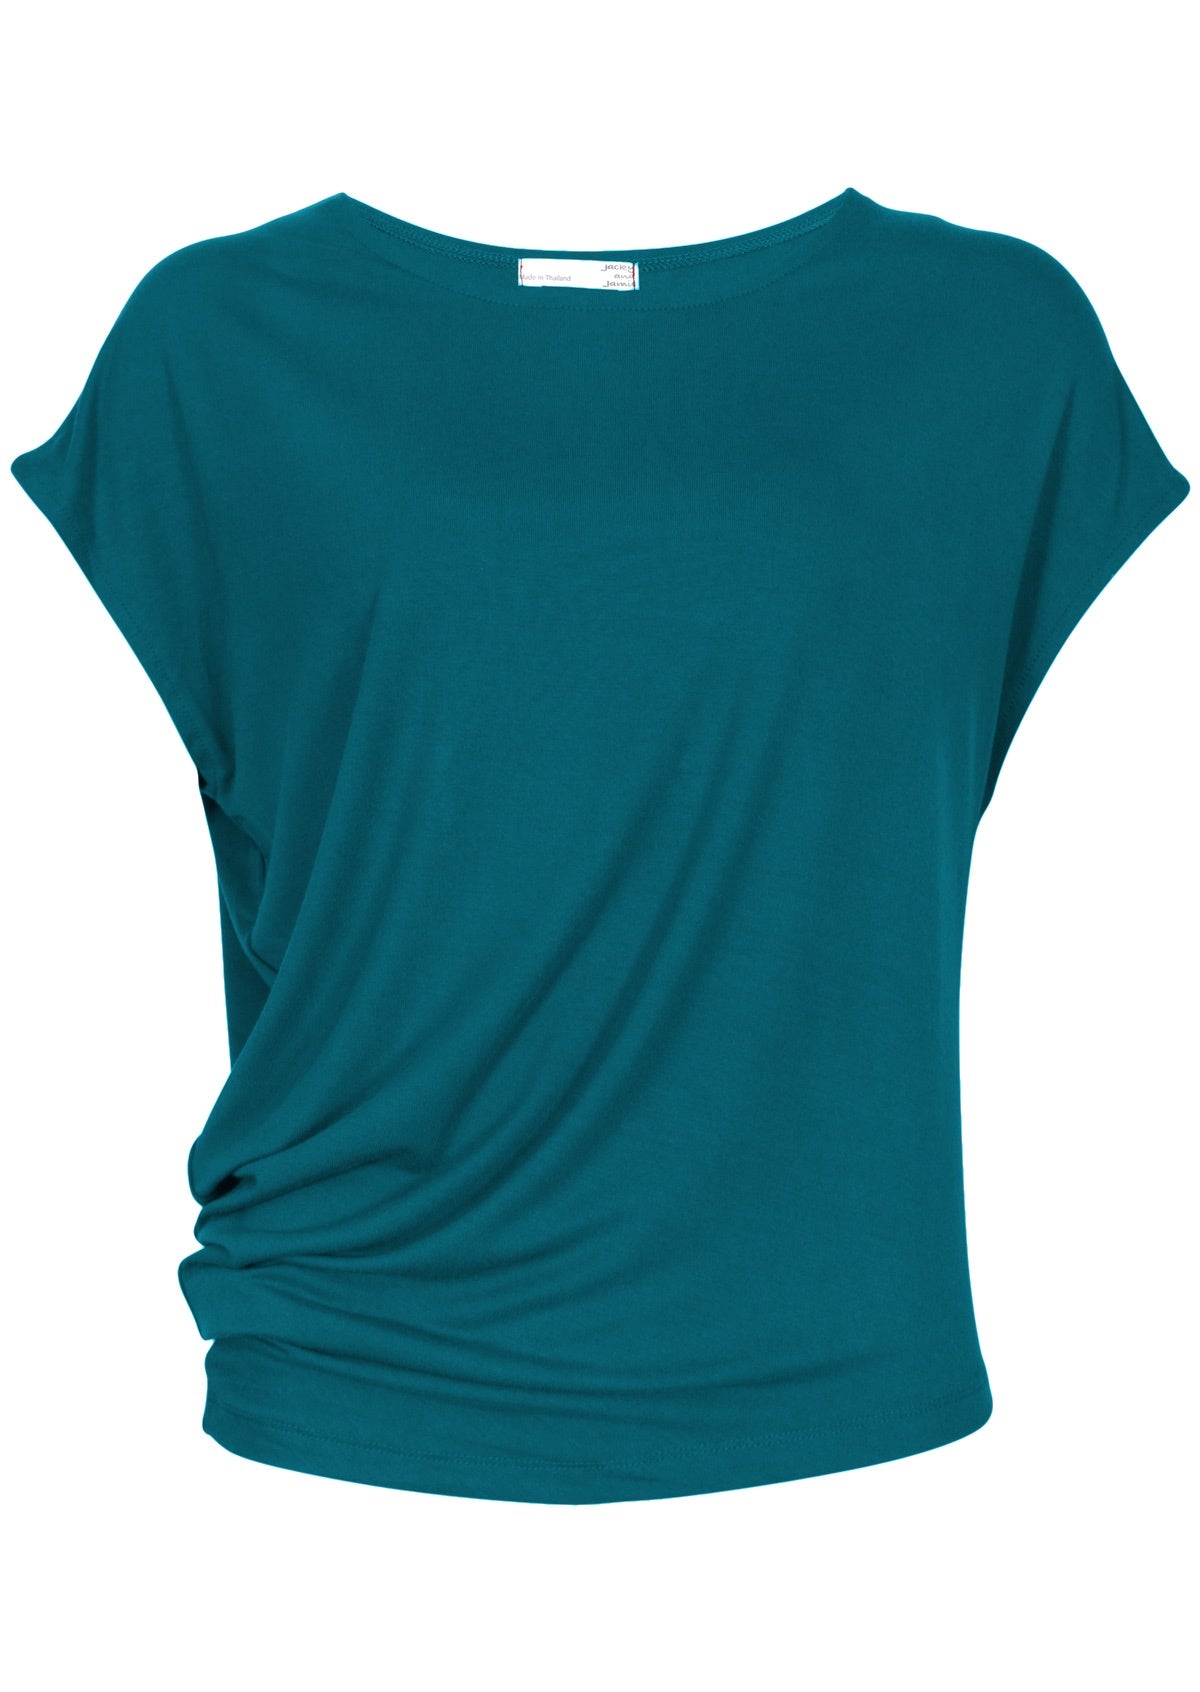 short sleeve simple women's top with asymmetrical hemline creating gathering at side